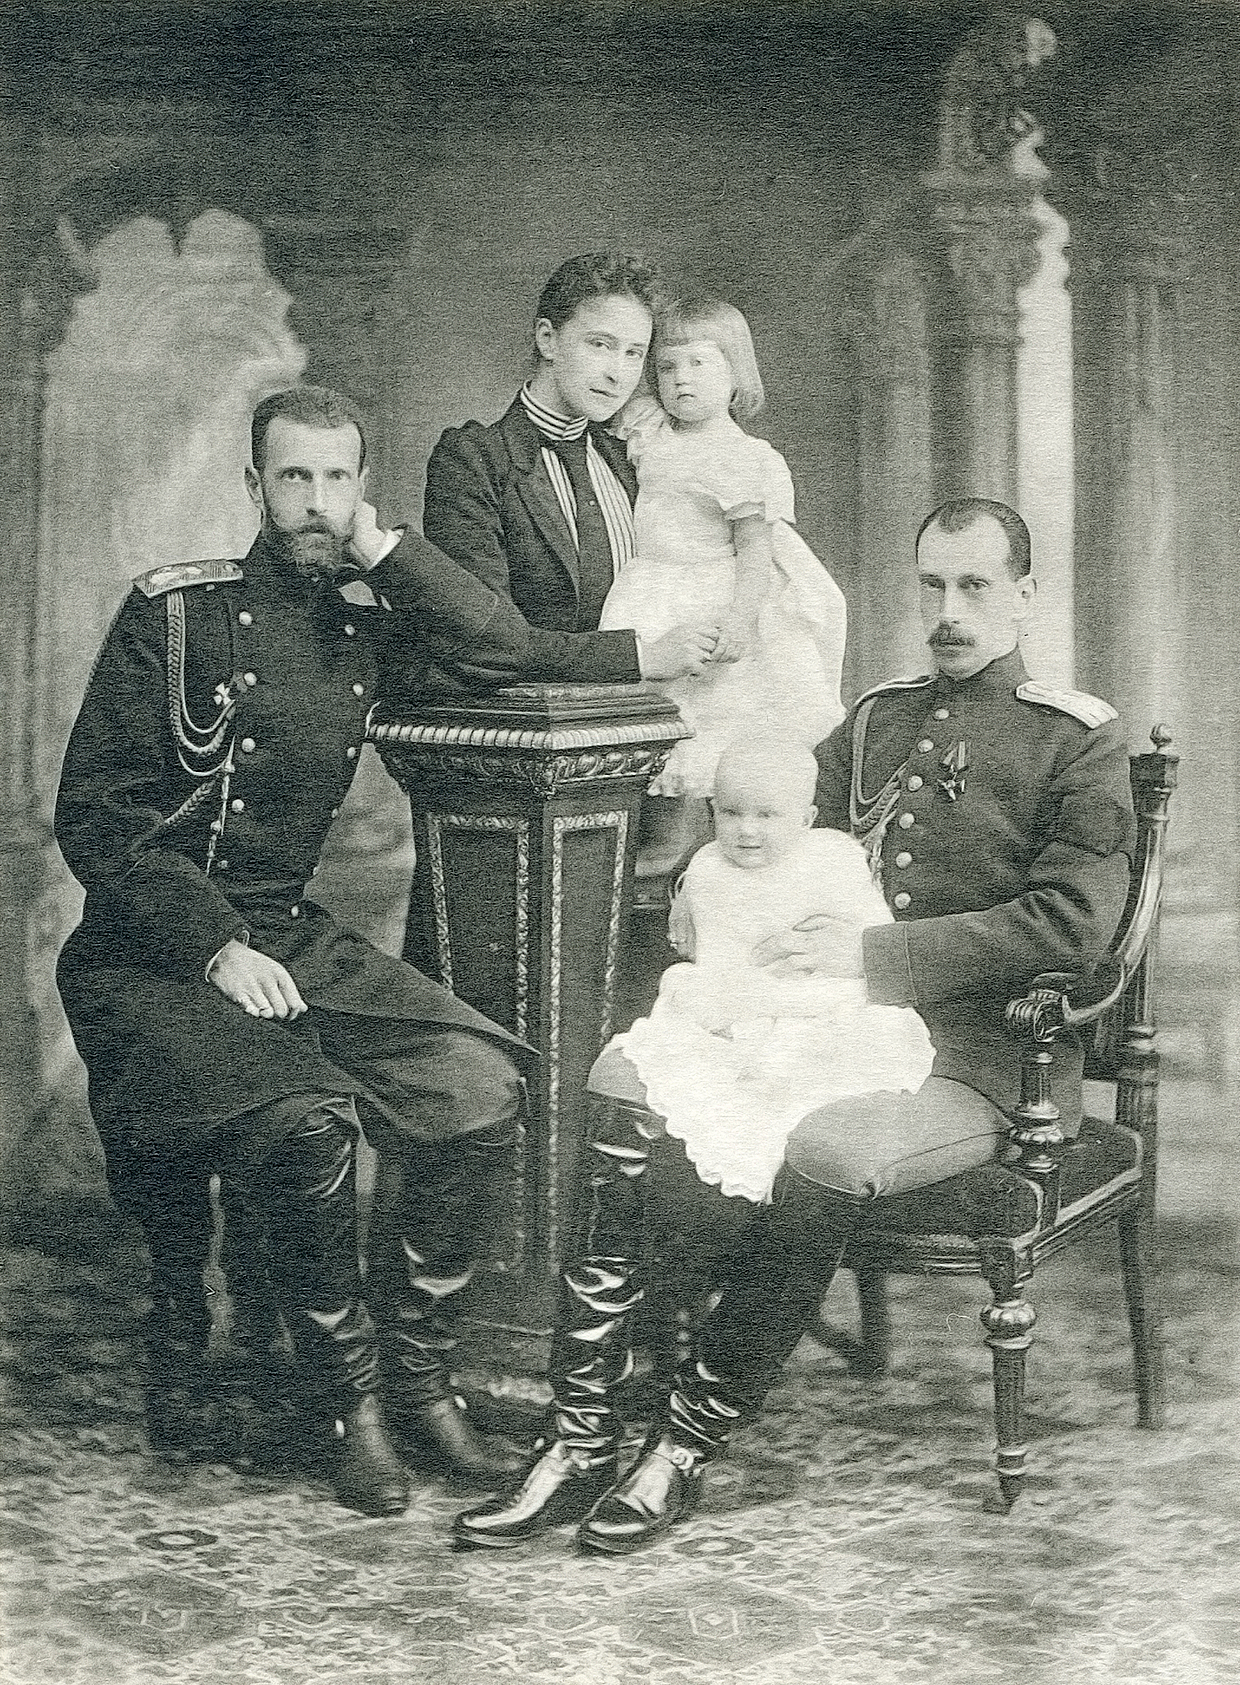 Paul and Alexandra’s first child was Princess Maria, born in 1890. In 1891 Alexandra Georgievna died of a miscarriage. The baby was saved, however, and Maria had a brother — Grand Duke Dmitri. / Pictured: Grand Duke Paul Alexandrovich, his children Dmitri and Maria, his brother Grand Duke Sergei Romanov with wife Grand Duchess Elizaveta Fyodorovna, 1892.